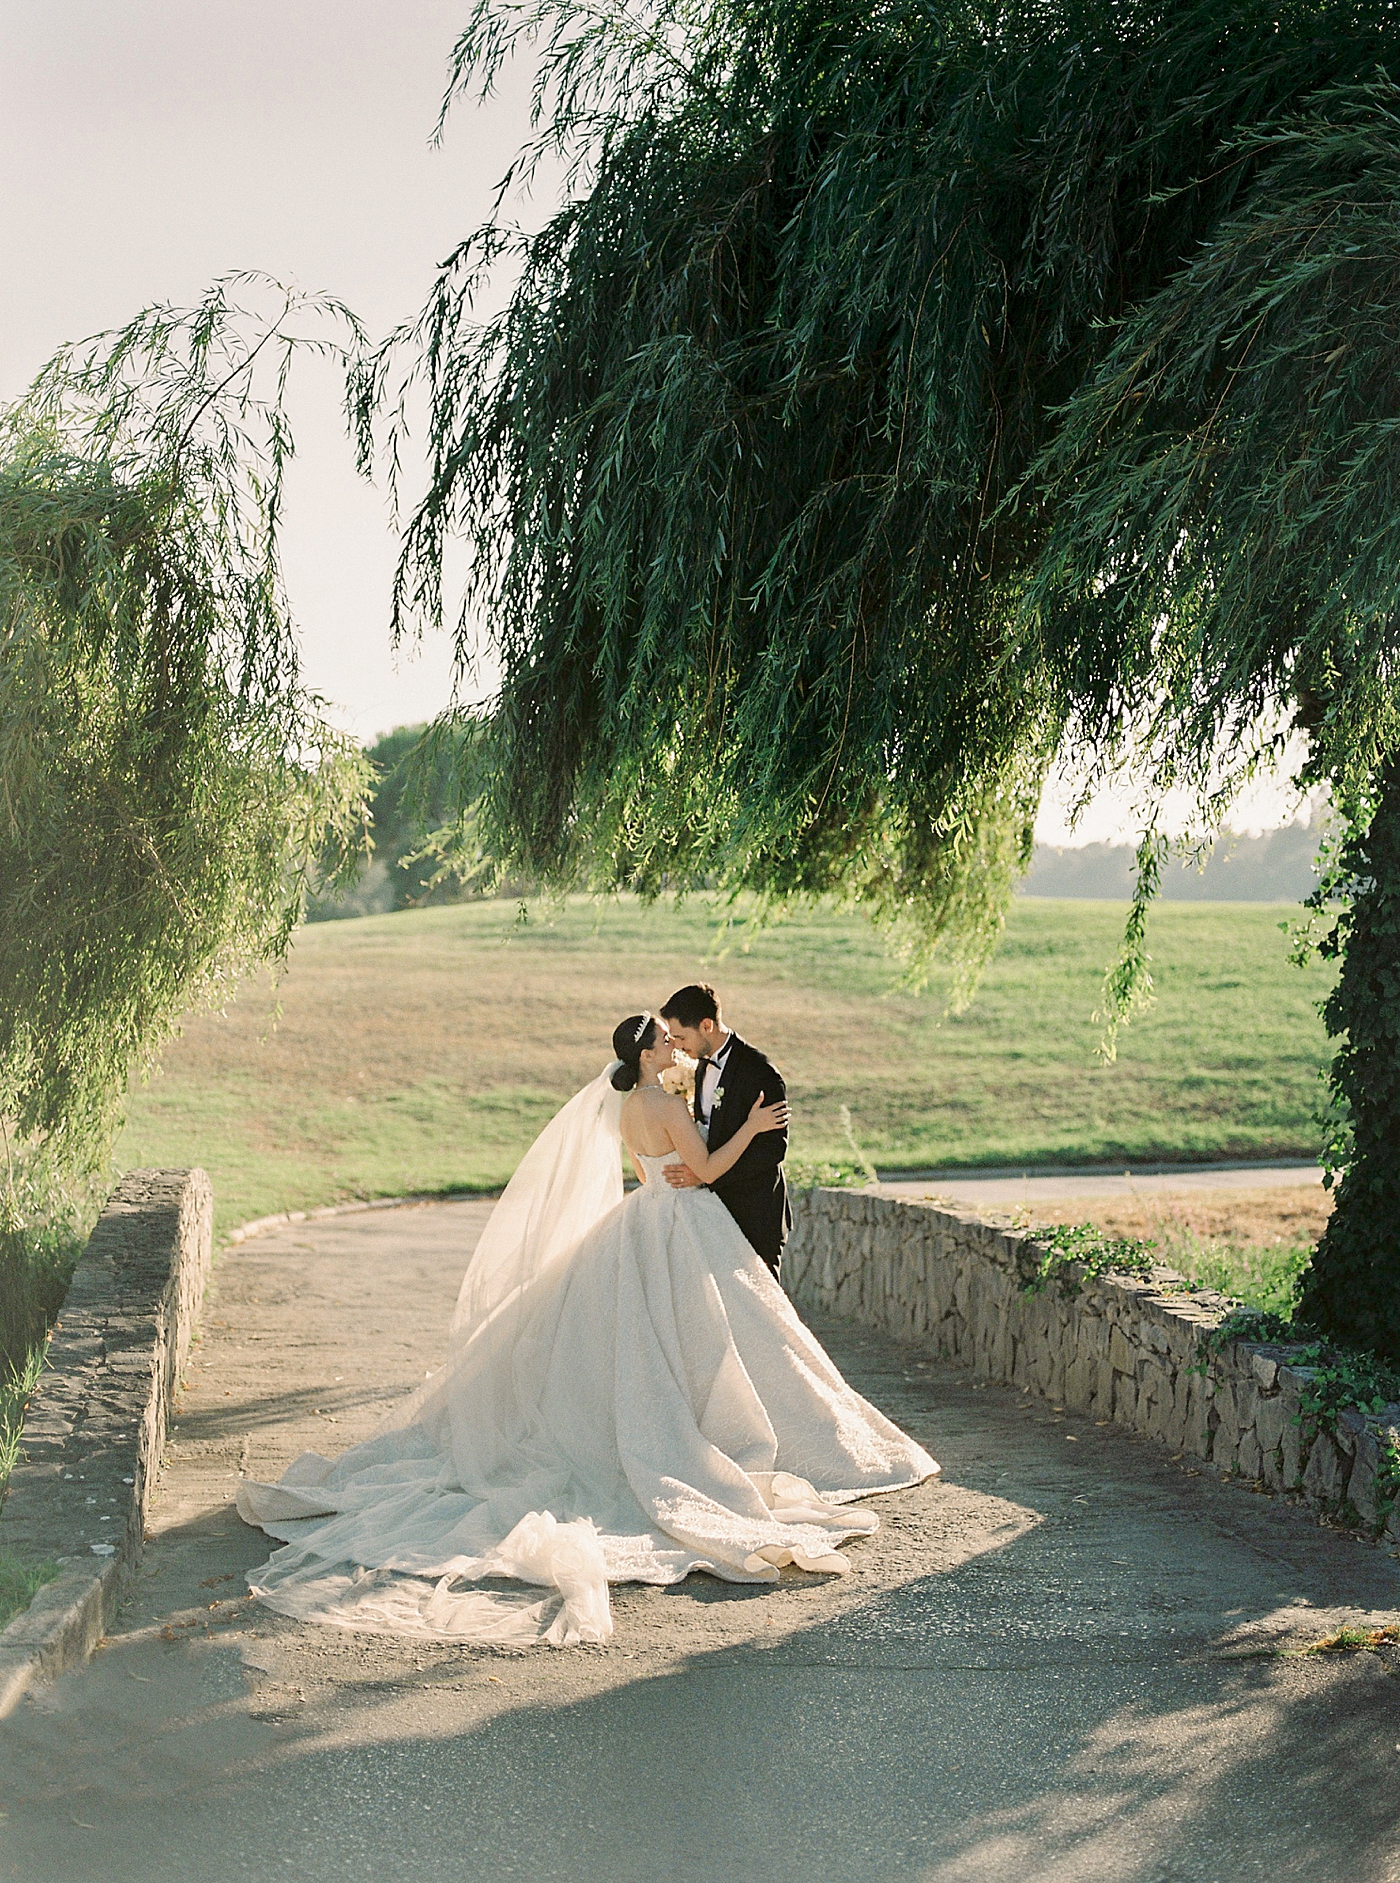 Bride and groom on a pathway under trees | Image by Diane Sotero